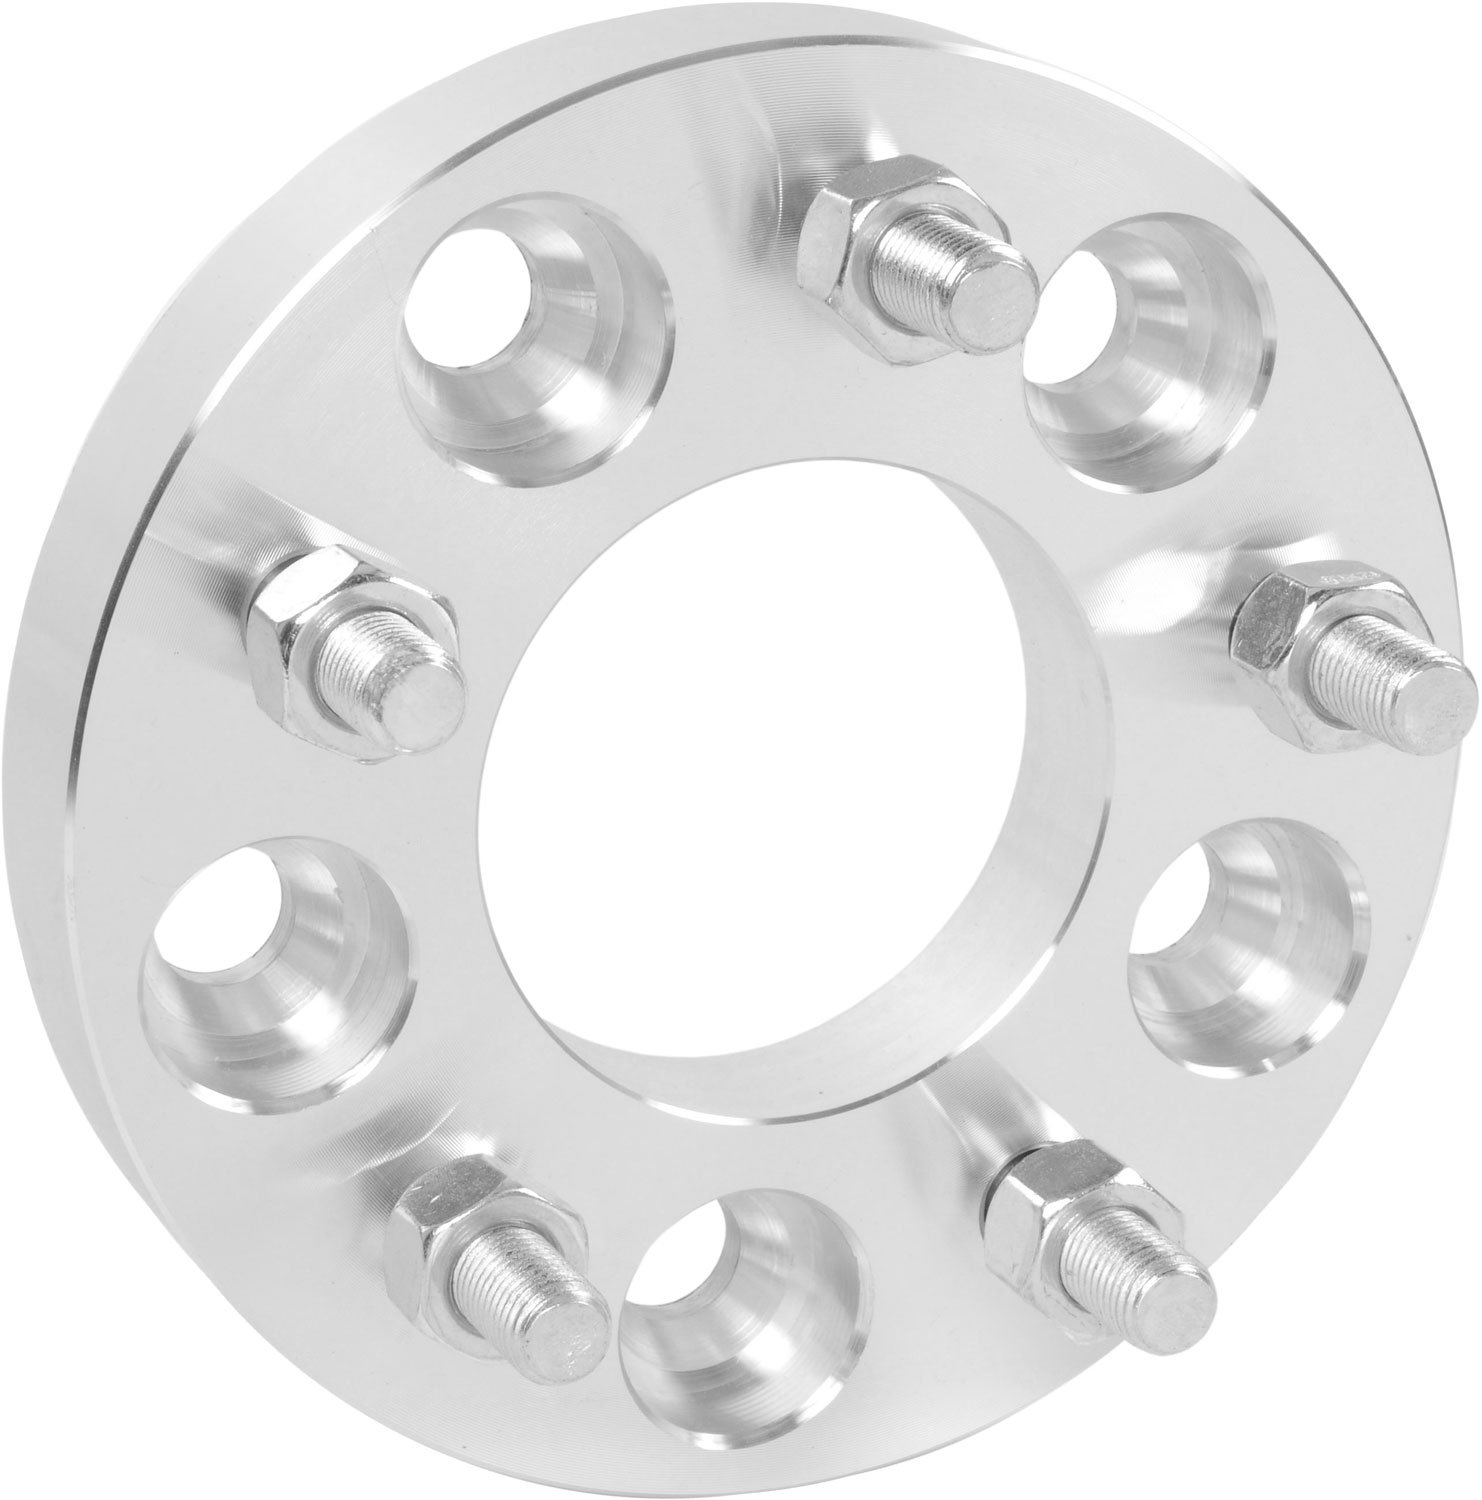 5-Lug Billet Aluminum Wheel Spacer [1 in. Thick]  5 x 4.75 in. Bolt Pattern